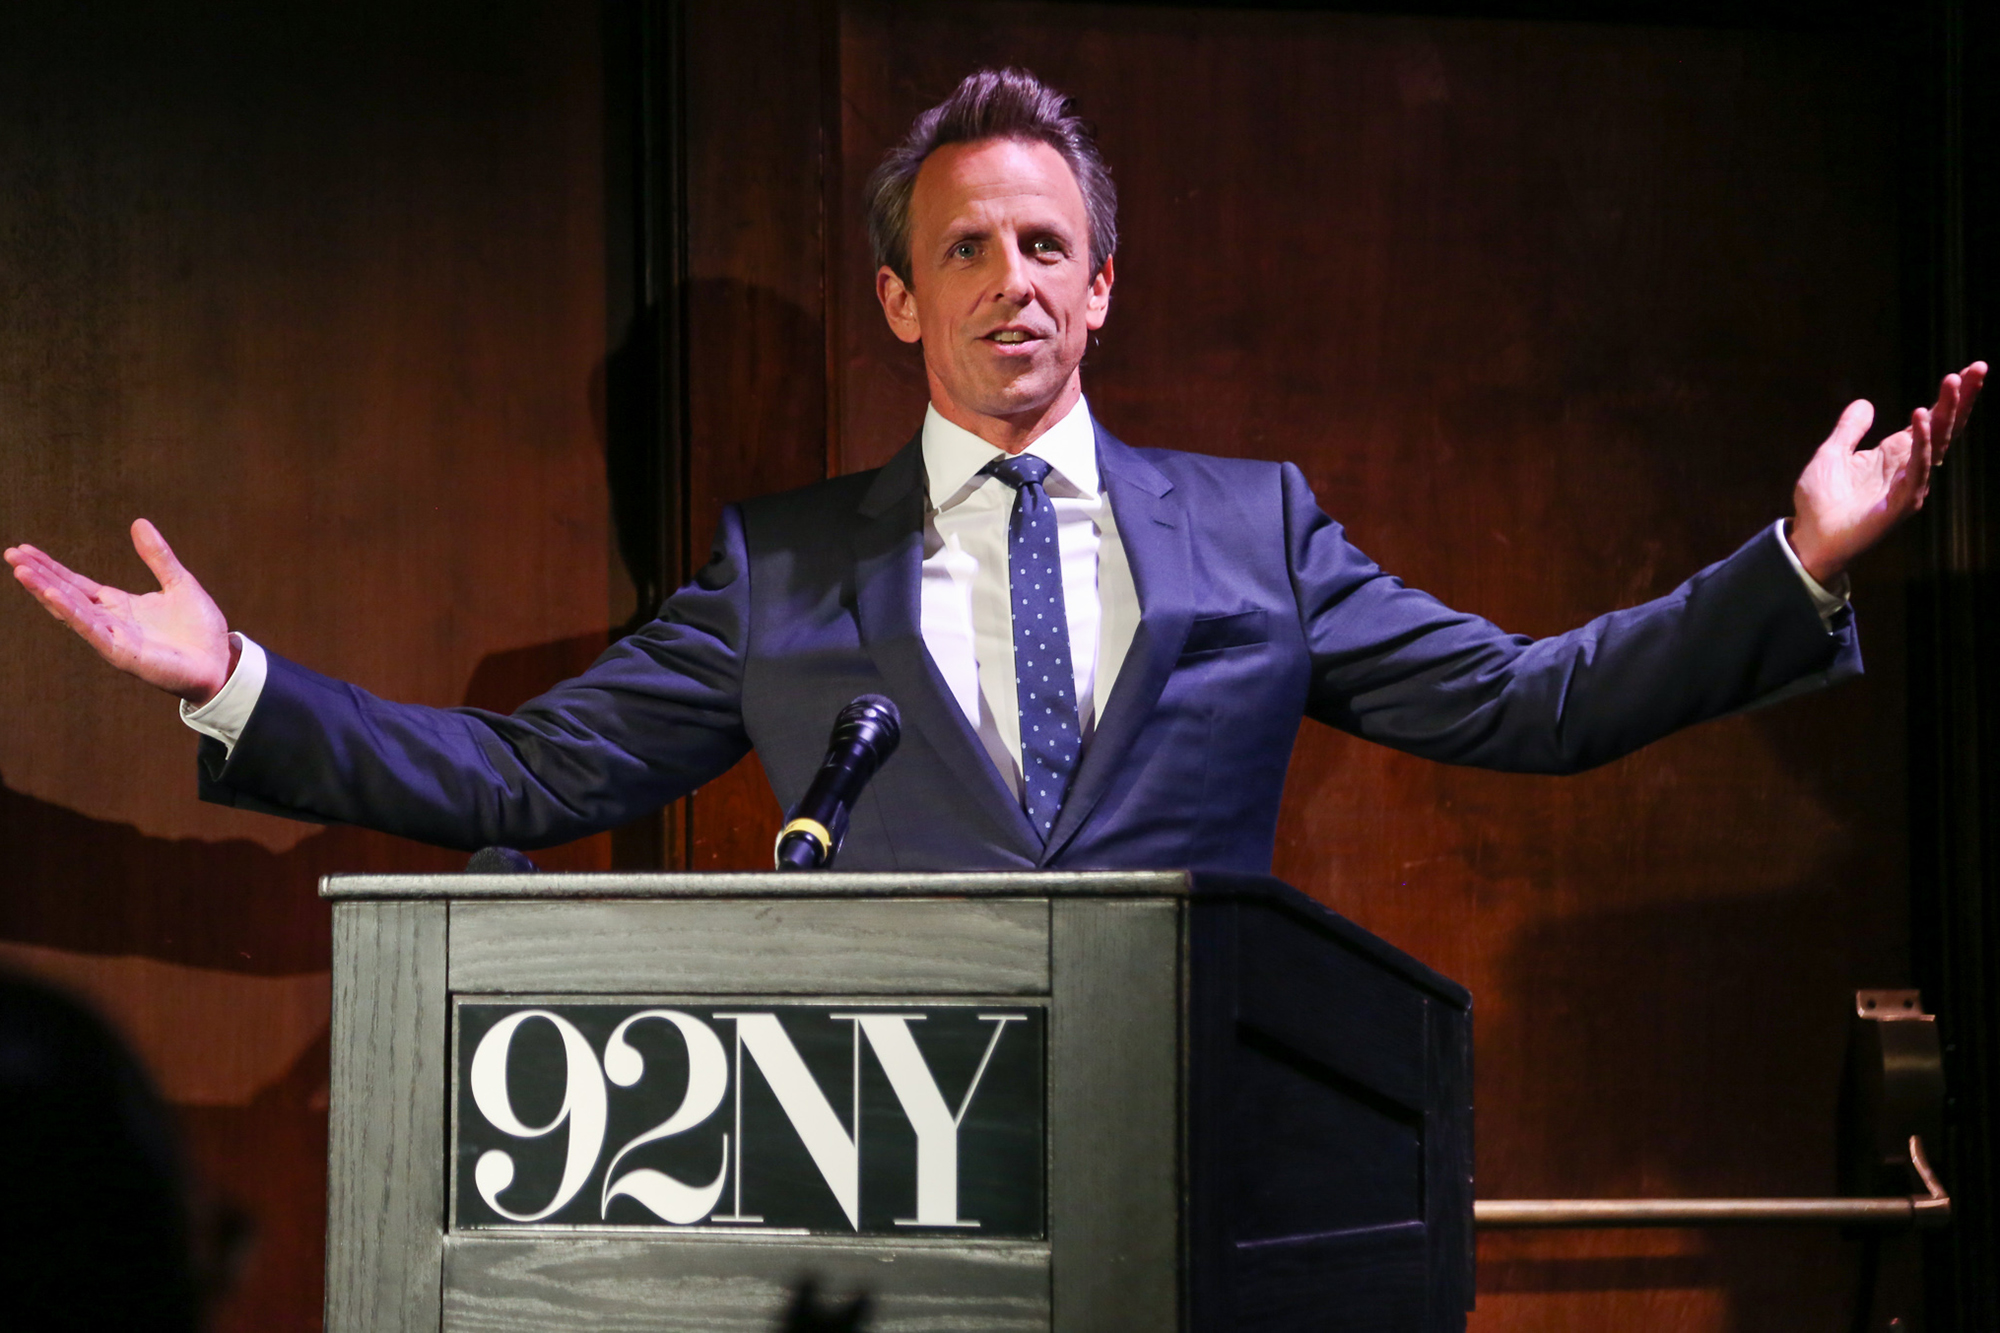 Seth Meyers jokes about his love for New York City at 92nd Street Y gala